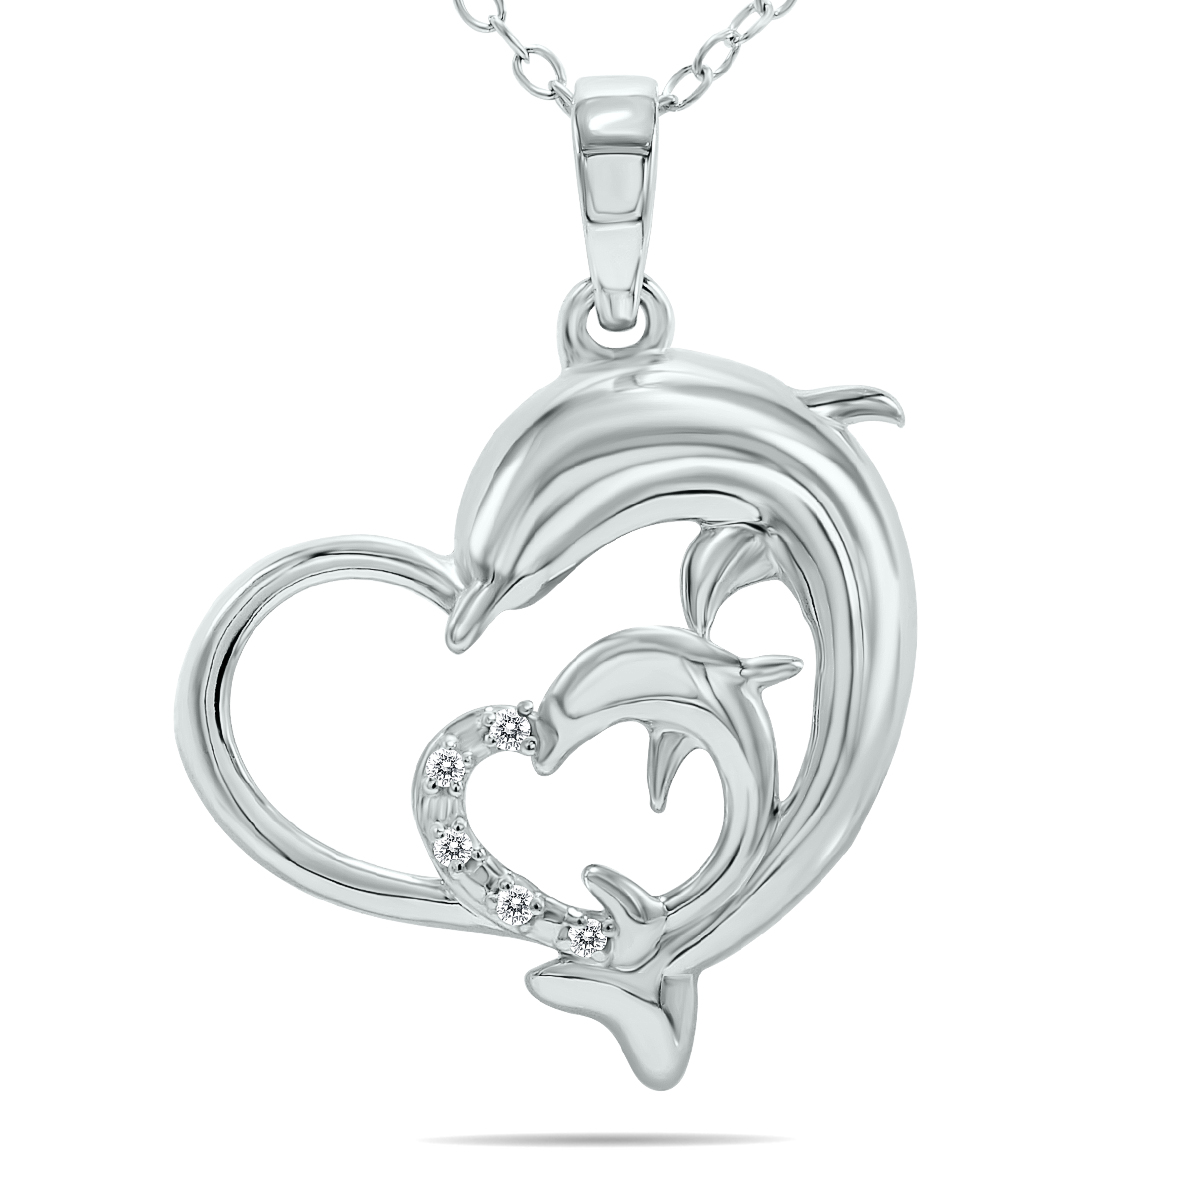 Double Dolphin Diamond Heart Necklace in .925 Sterling Silver